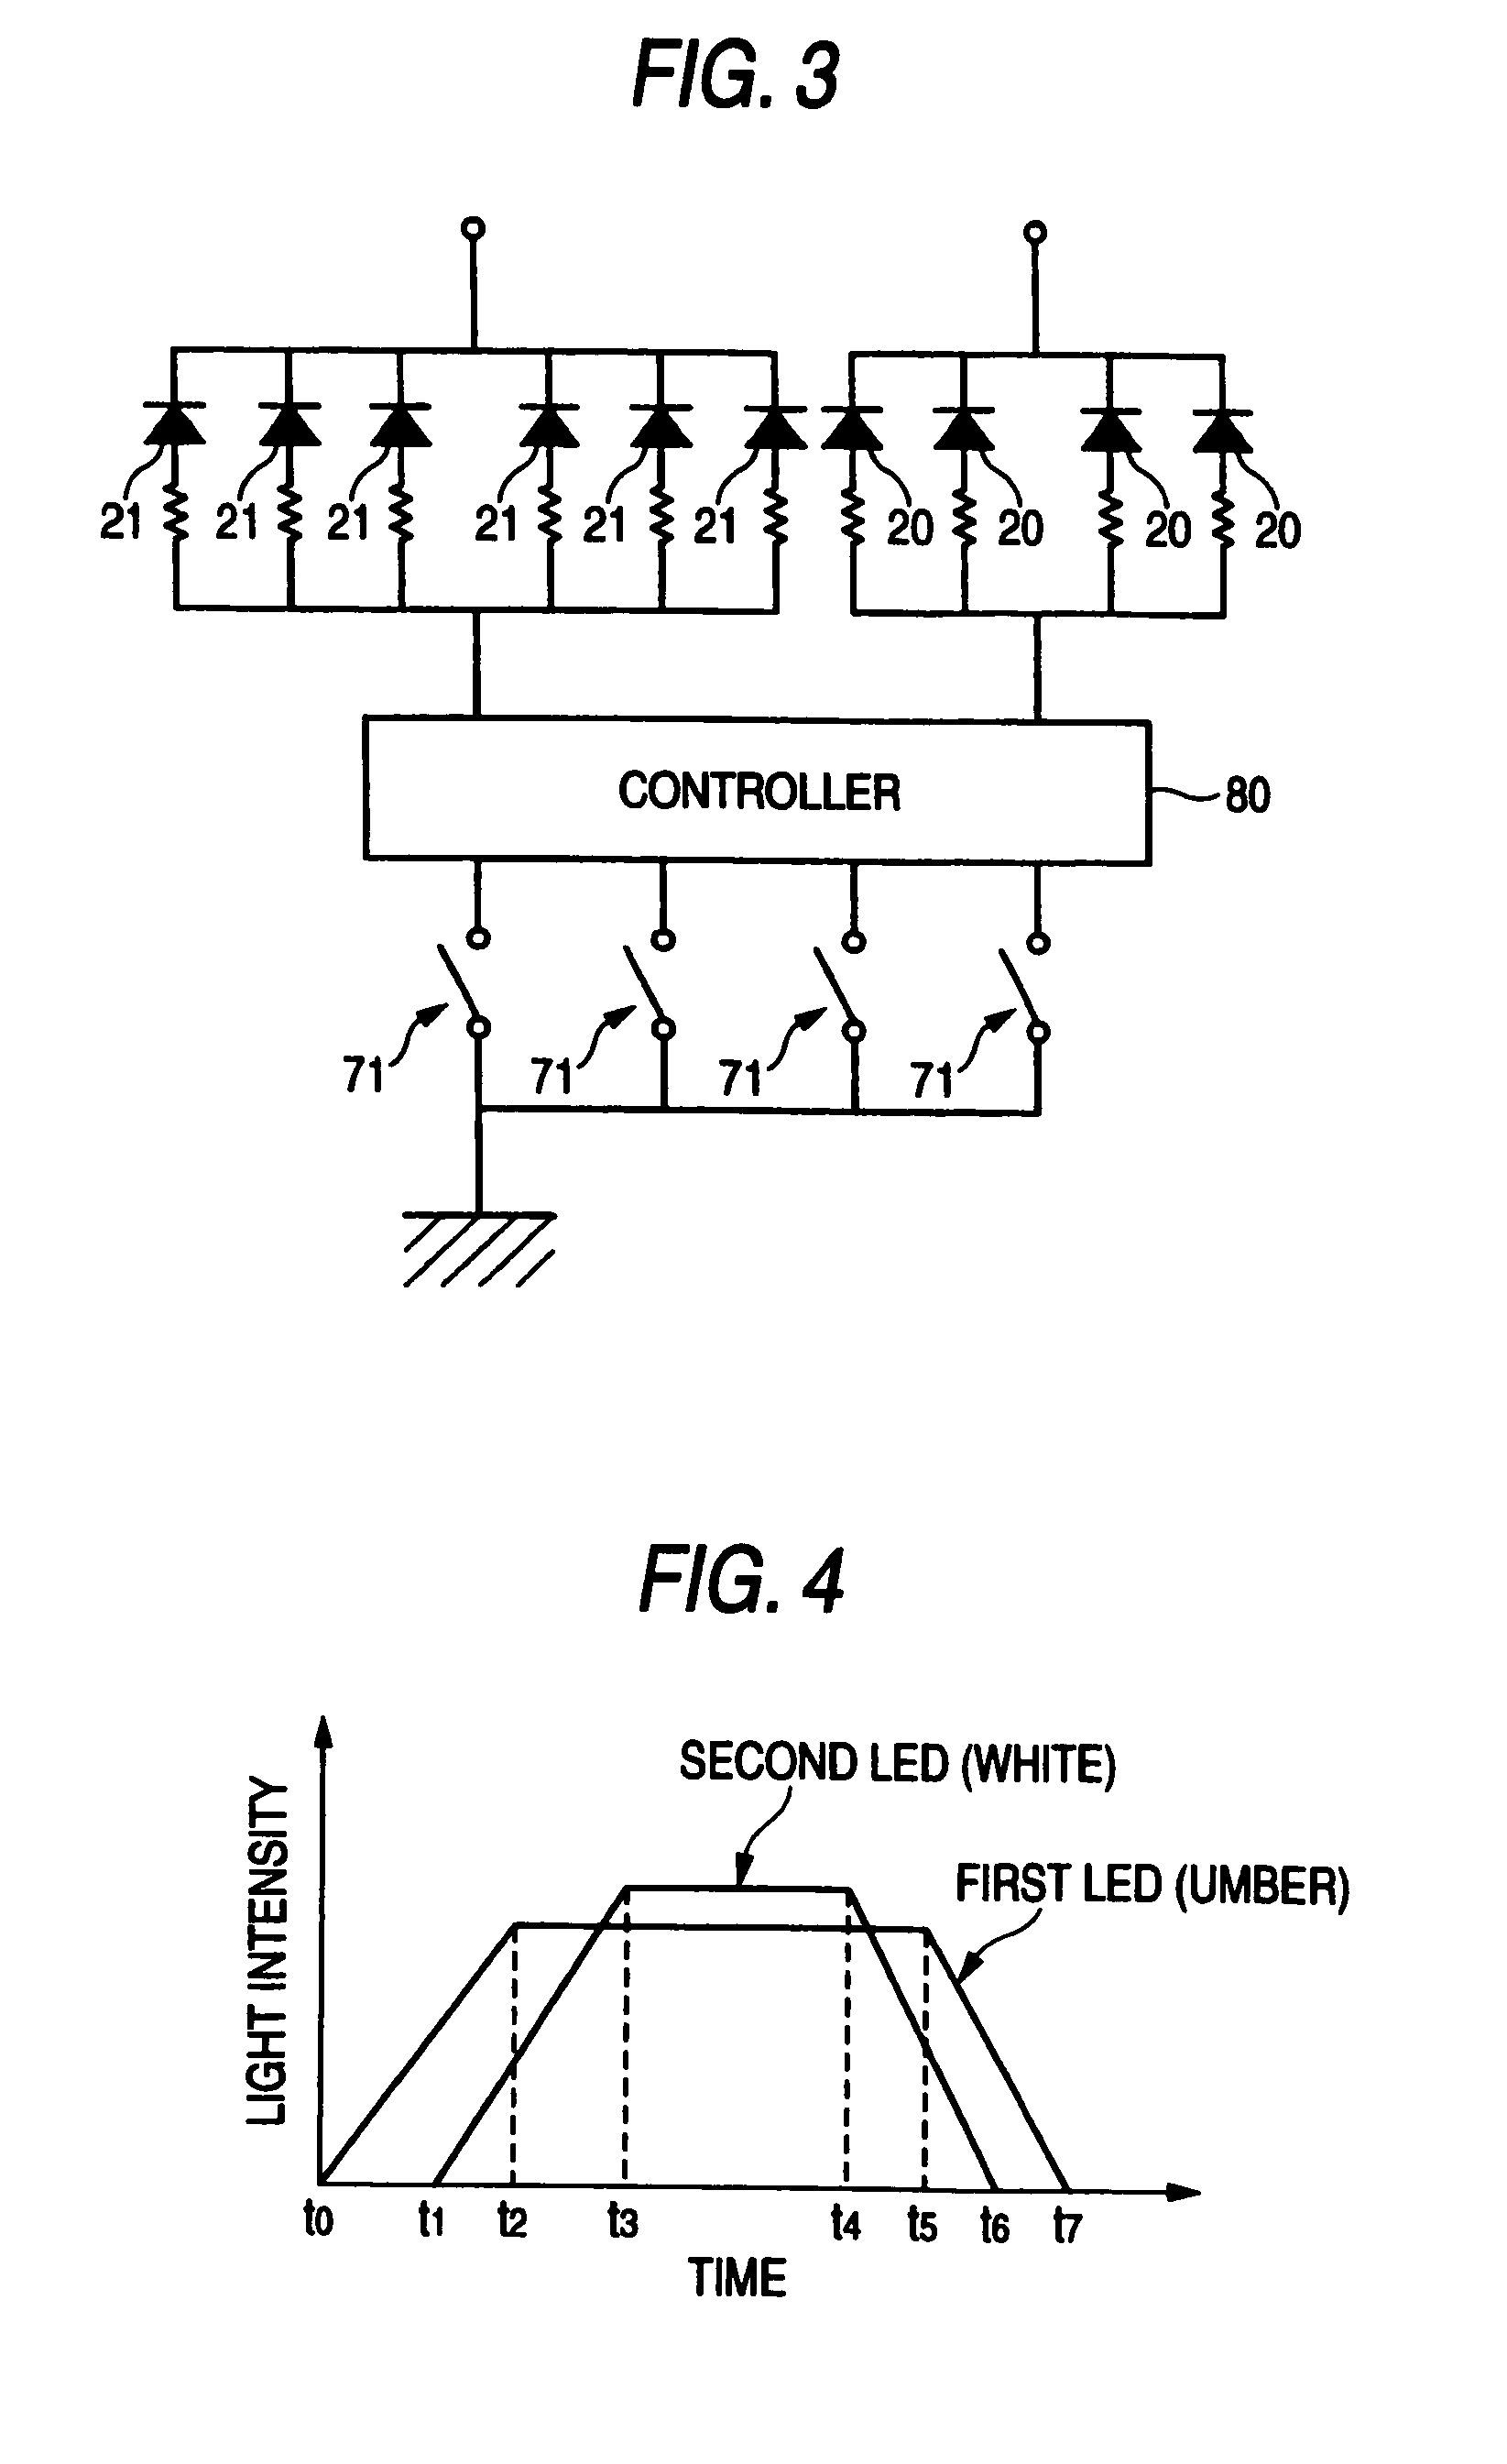 Illumination device for vehicle compartment